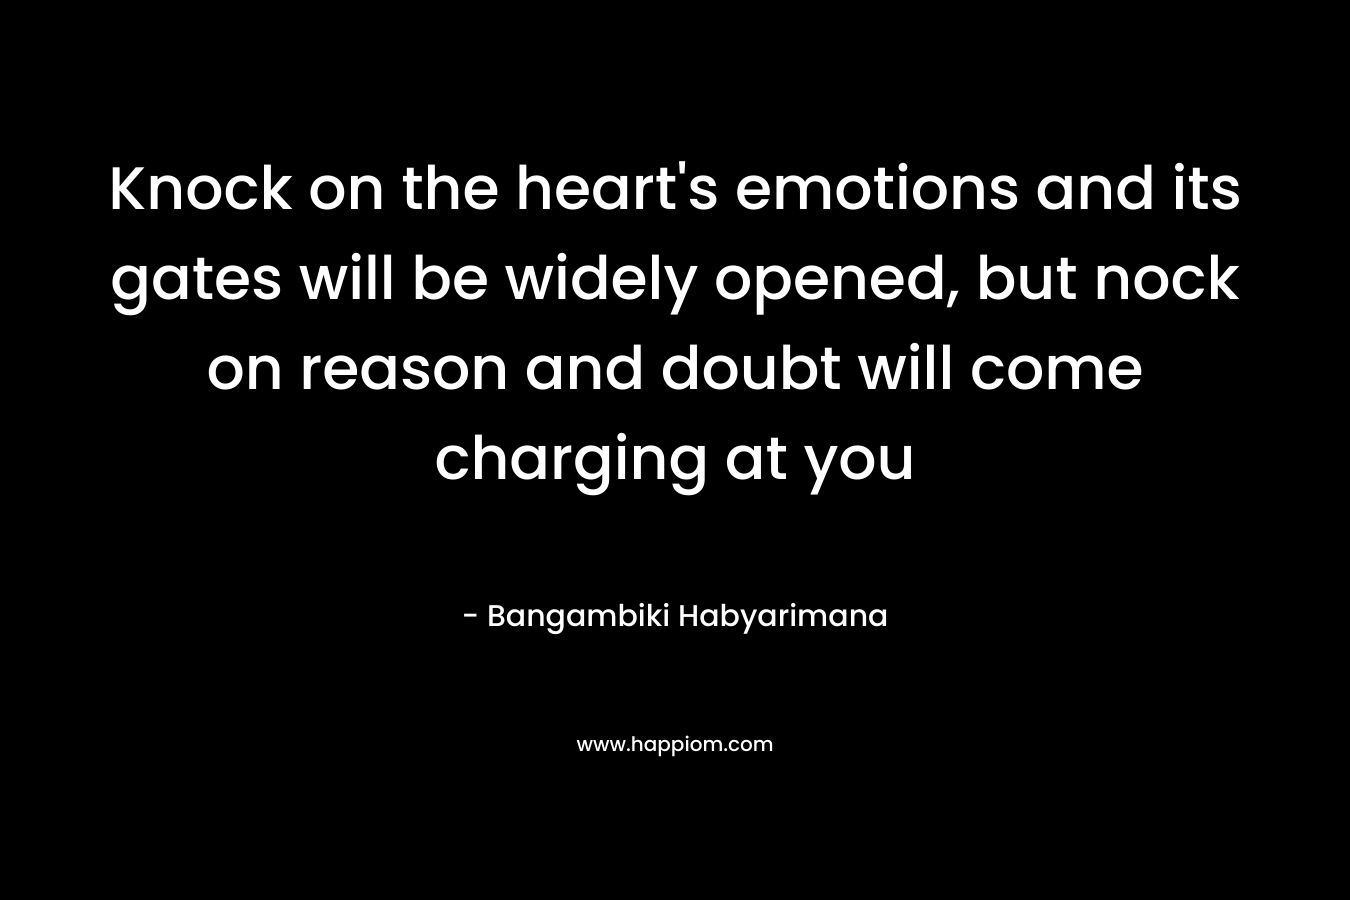 Knock on the heart's emotions and its gates will be widely opened, but nock on reason and doubt will come charging at you